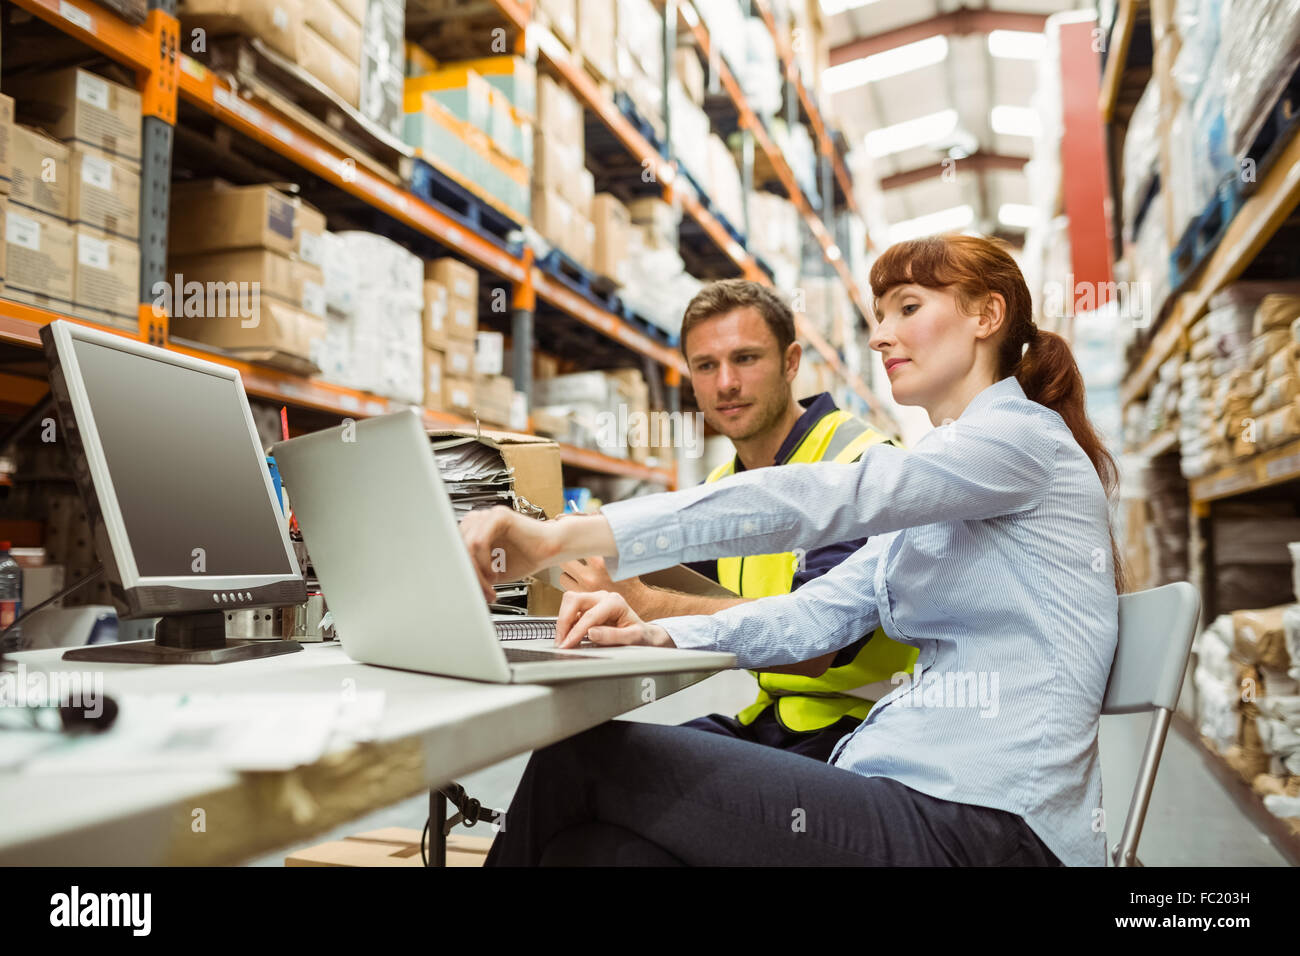 Warehouse worker and manager looking at laptop Stock Photo